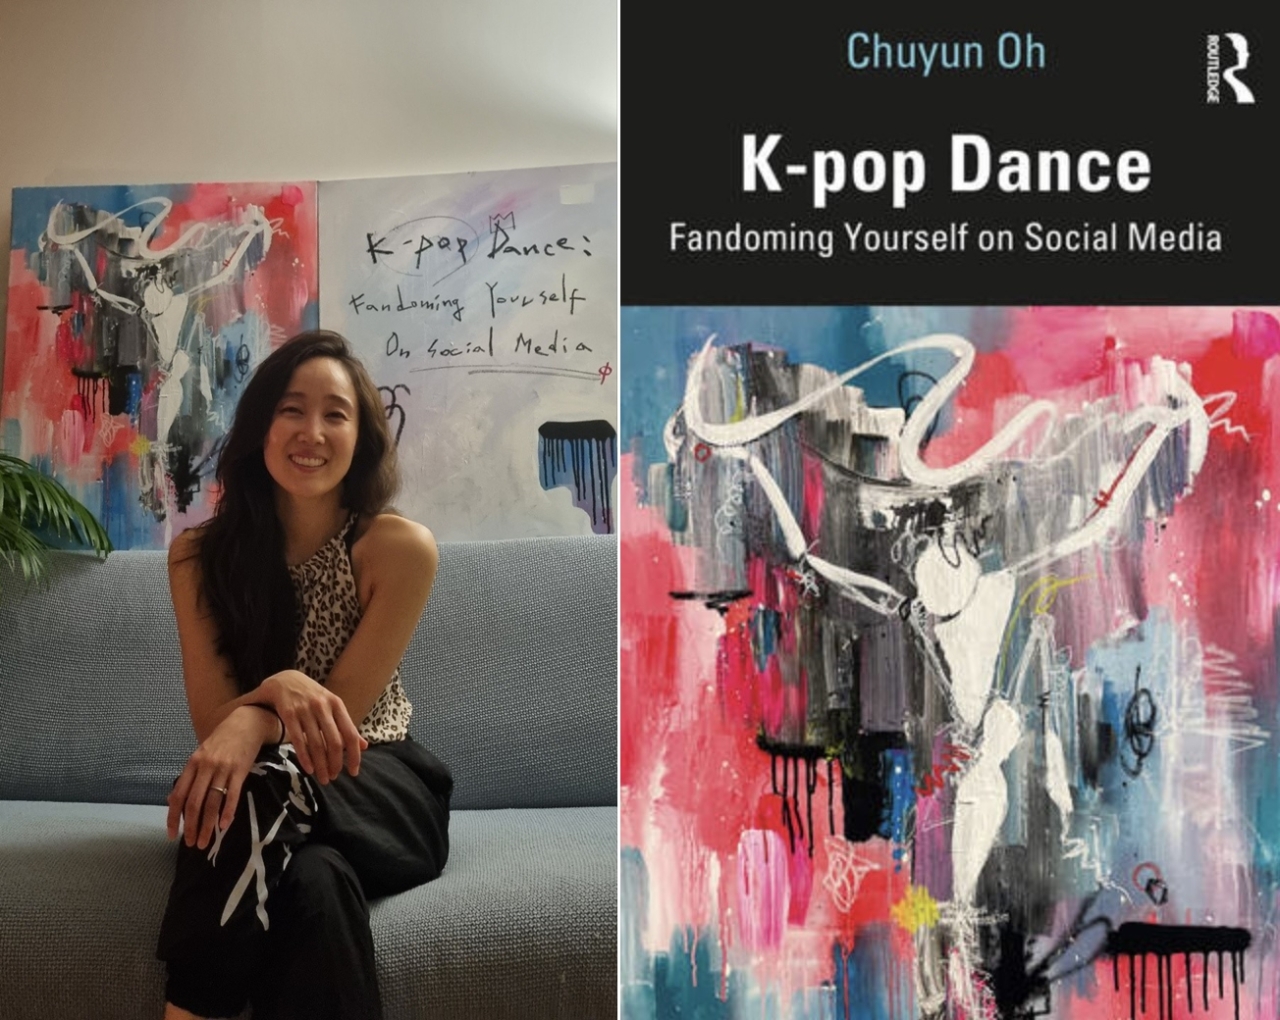 Chuyun Oh, Aassociate Professor of Dance Theory at San Diego State University and her new book